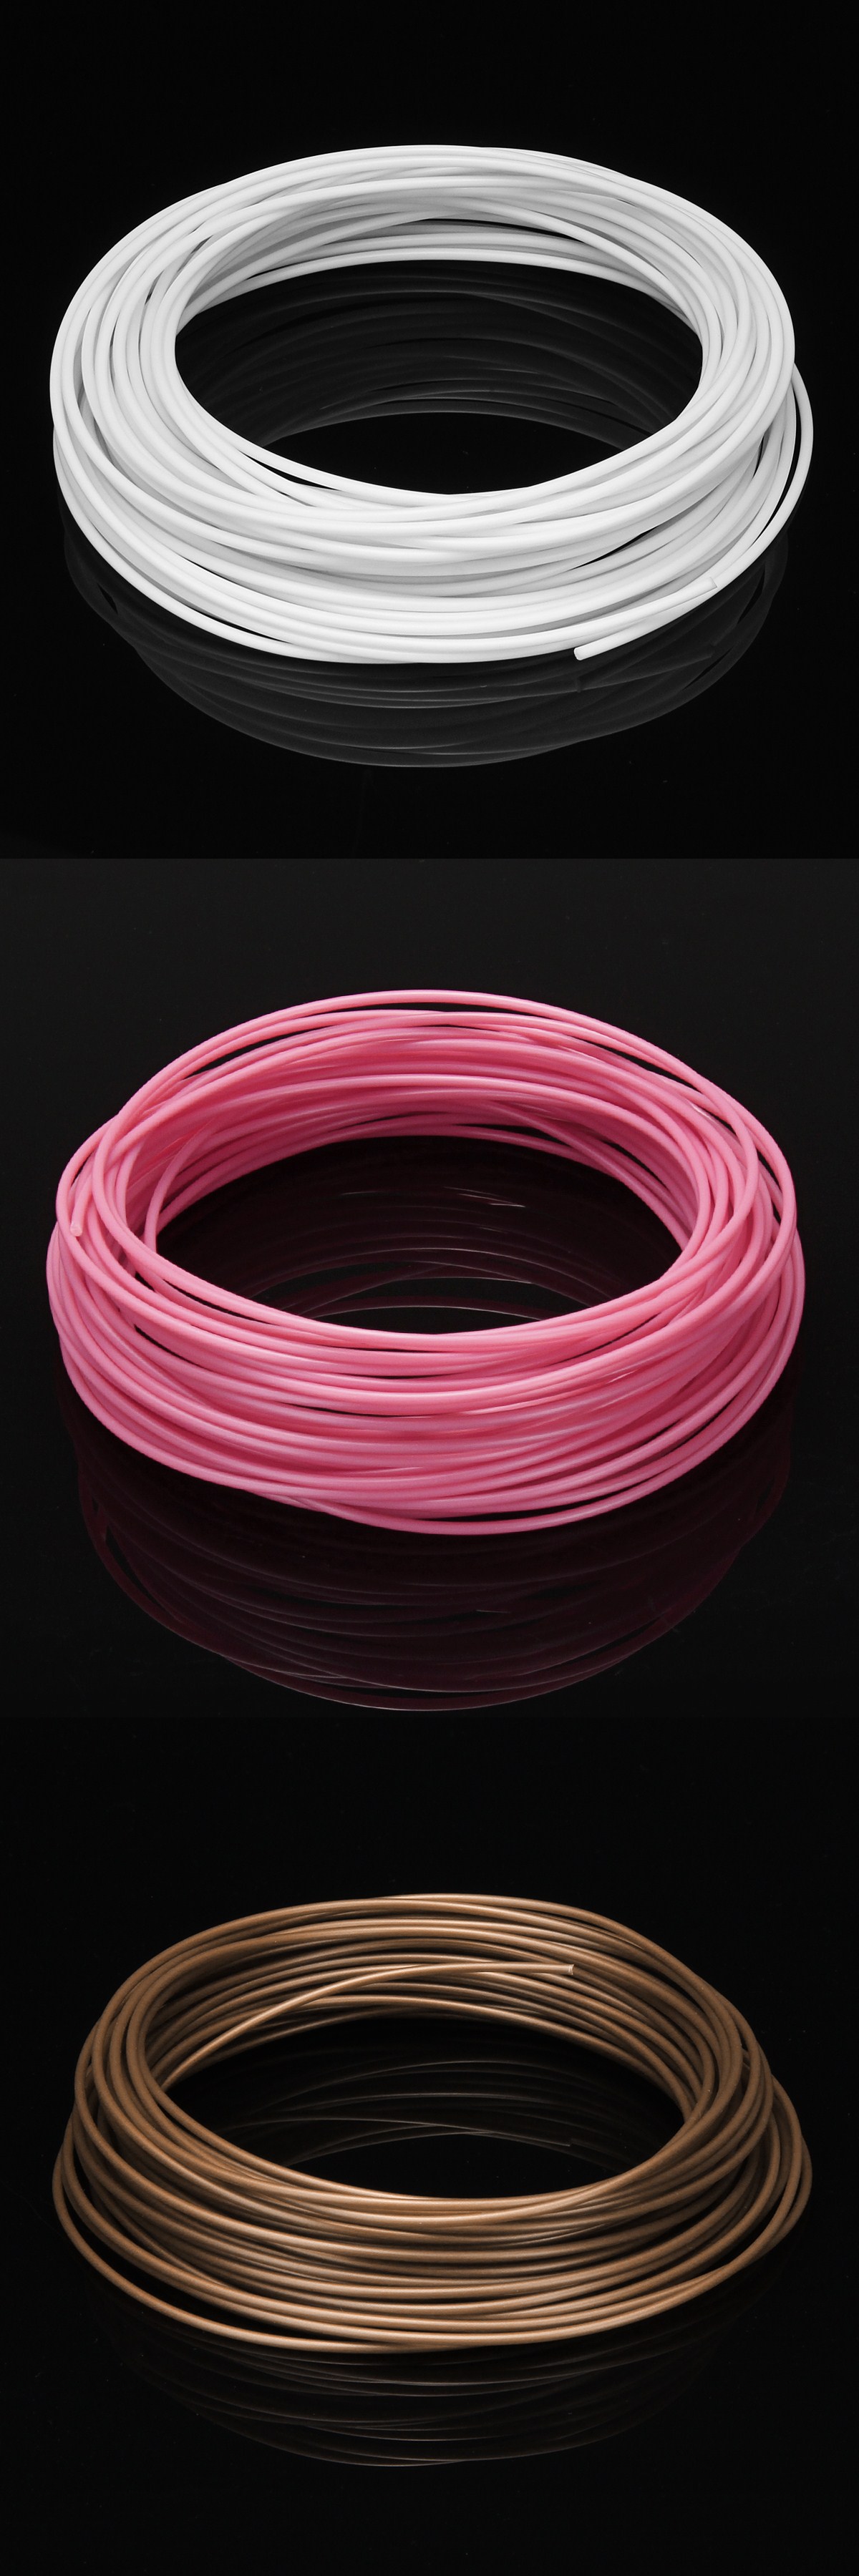 10m-One-Pack-175mm-PLA-Filament-For-3D-Printing-Pen-Muti-Color-Chosen-1255388